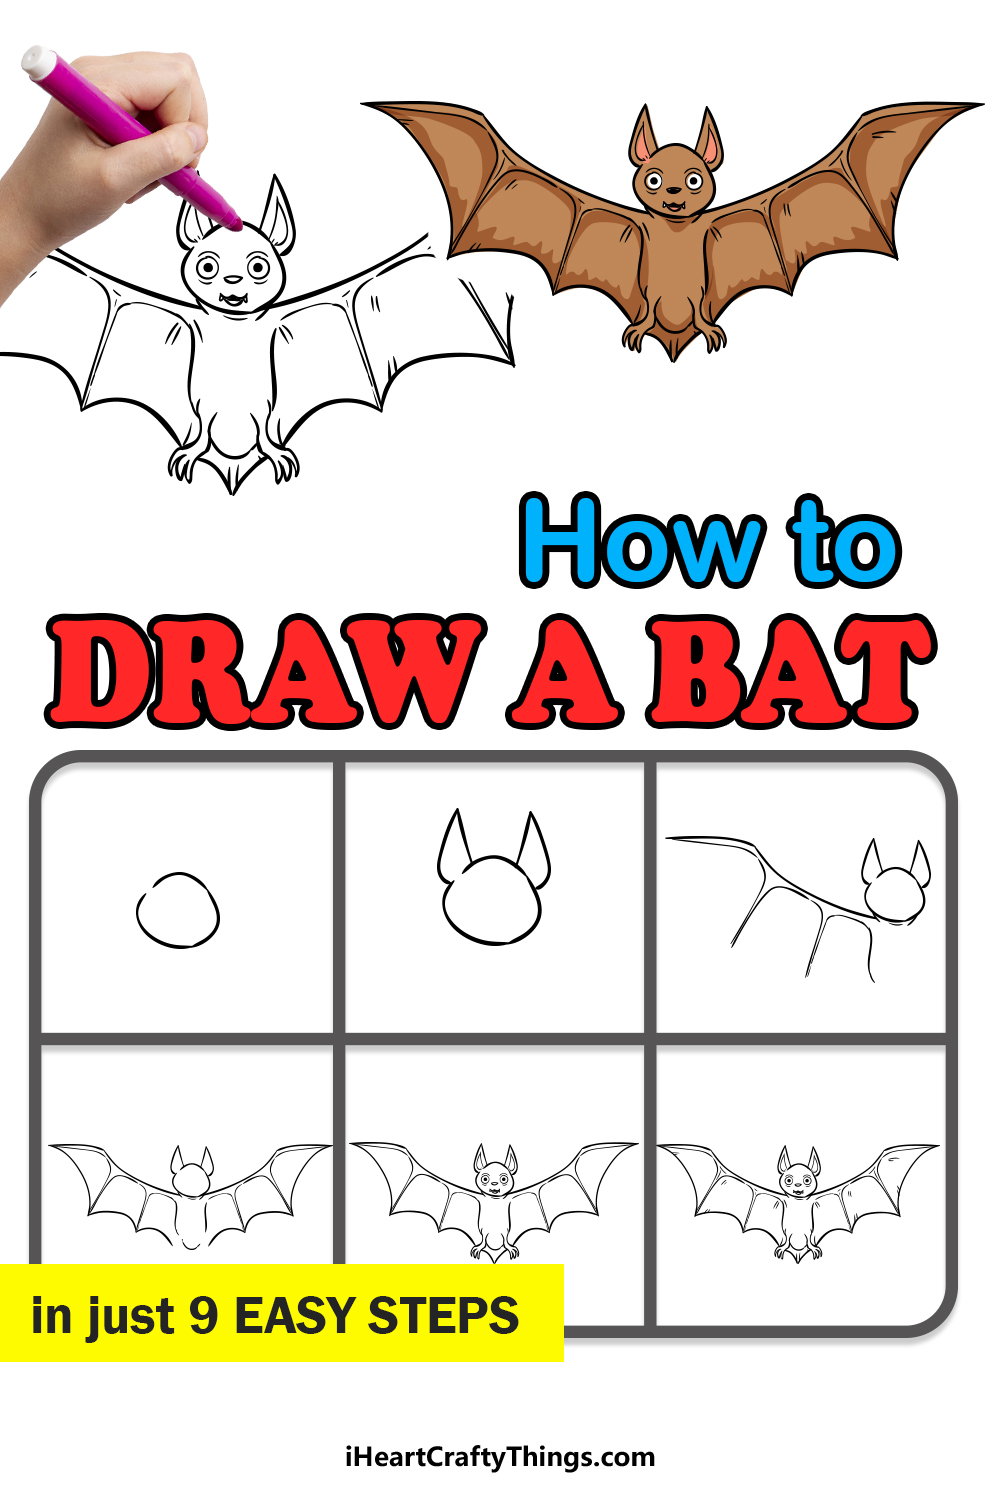 how to draw a bat in 9 easy steps